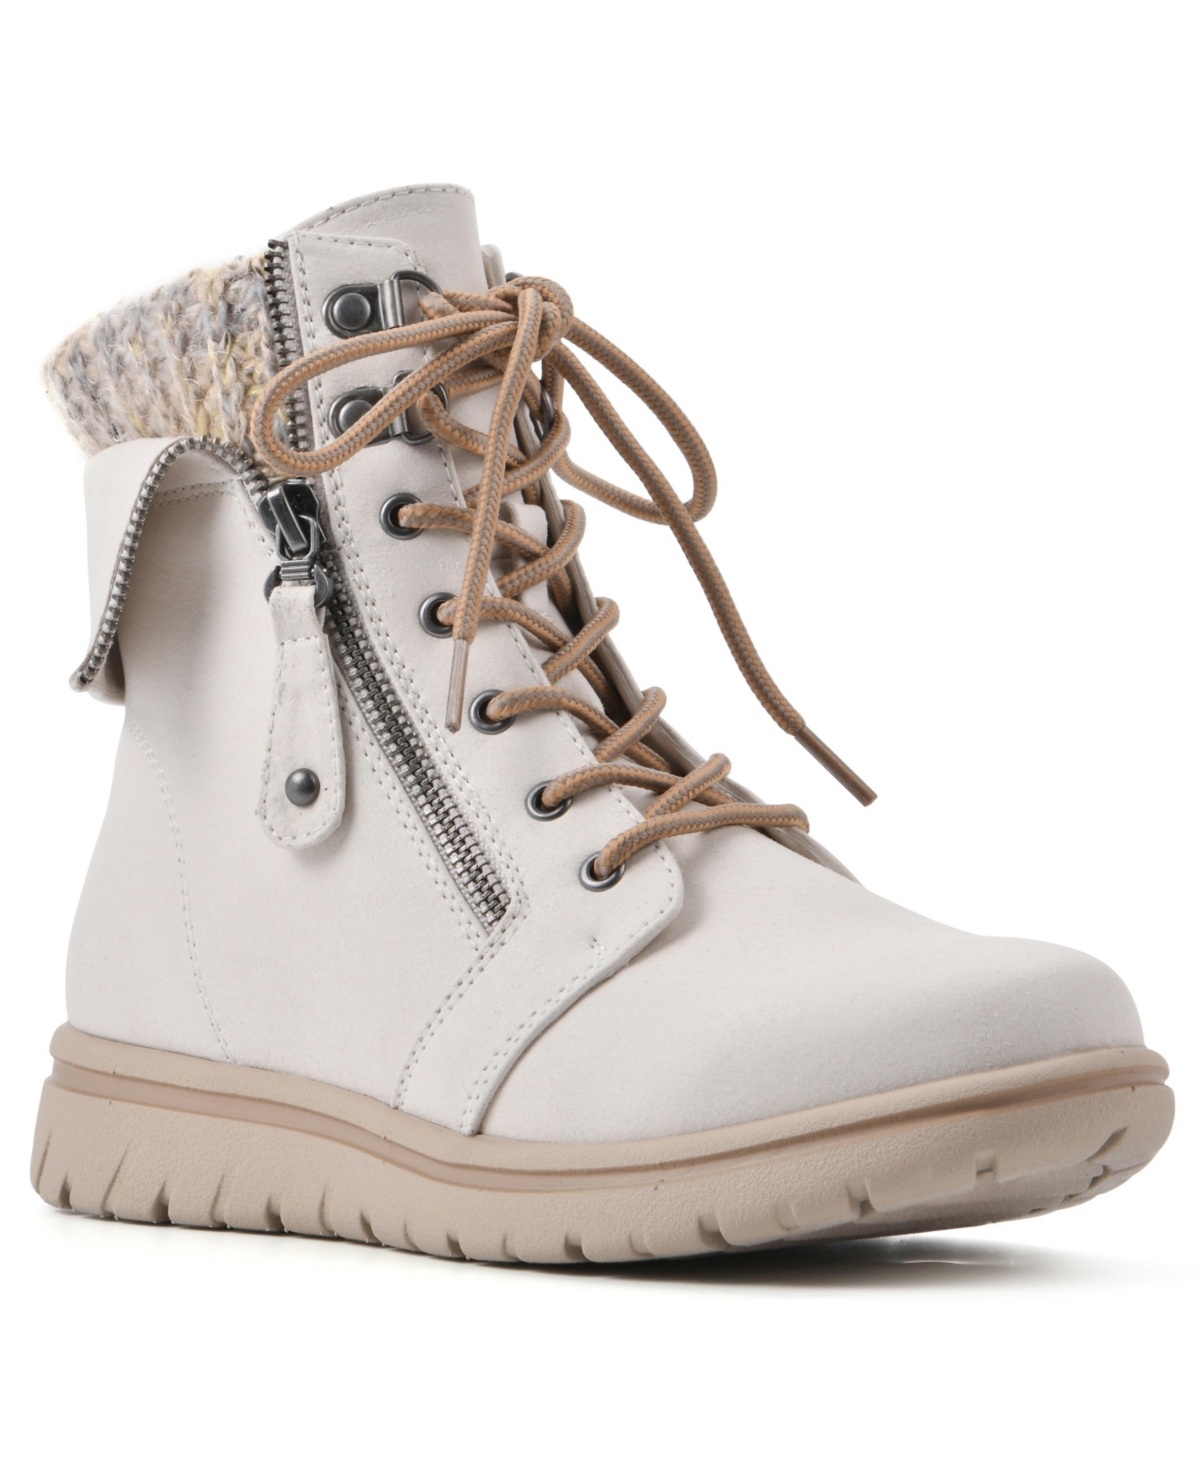 Women's Hope Lace-up Hiker Boots - Winter White Fabric Sweater